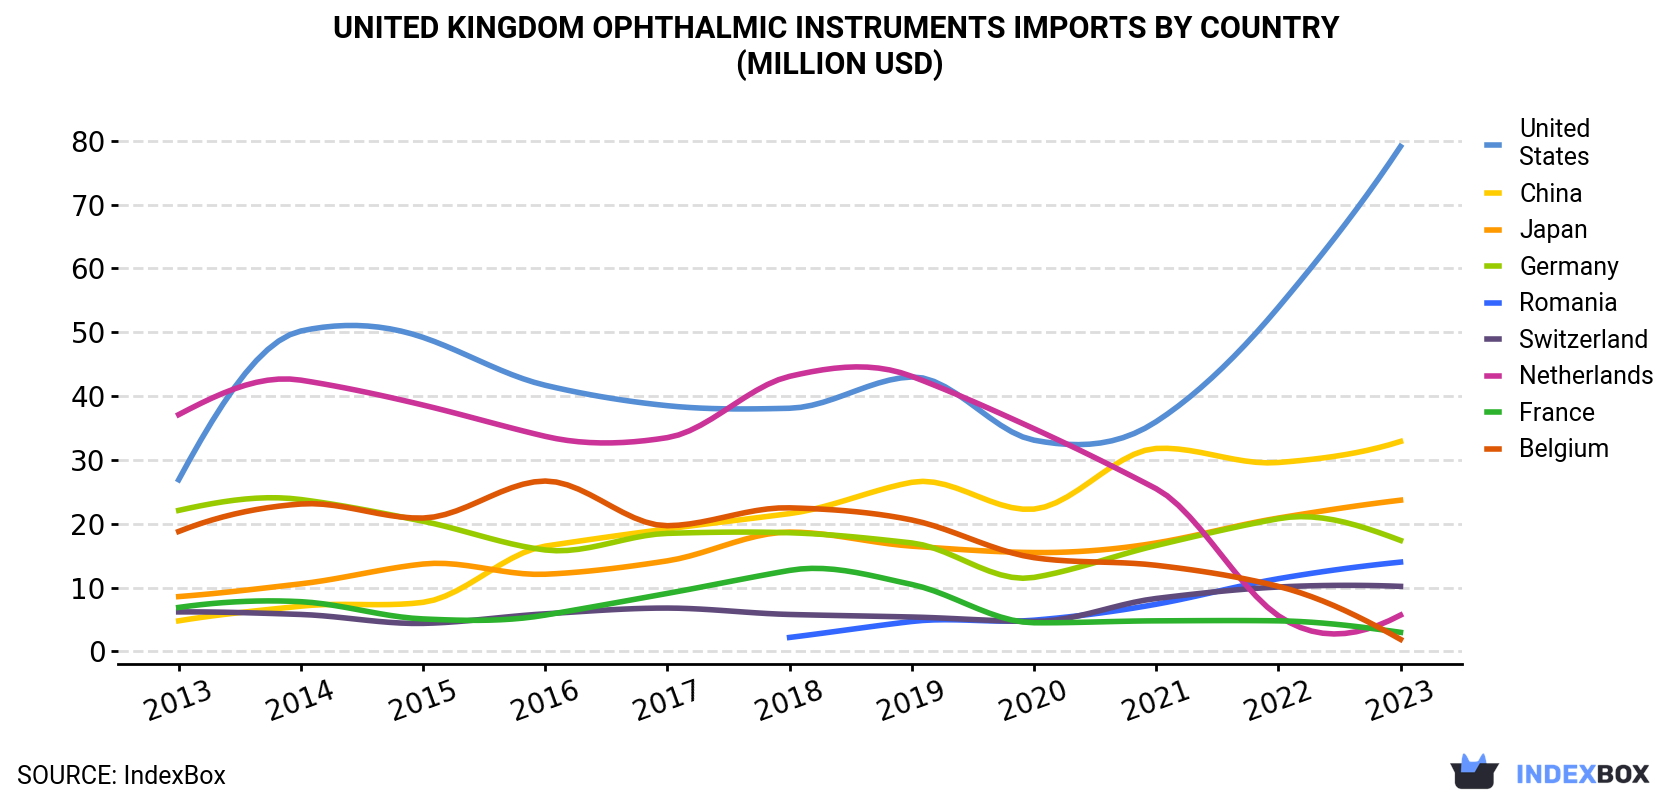 United Kingdom Ophthalmic Instruments Imports By Country (Million USD)